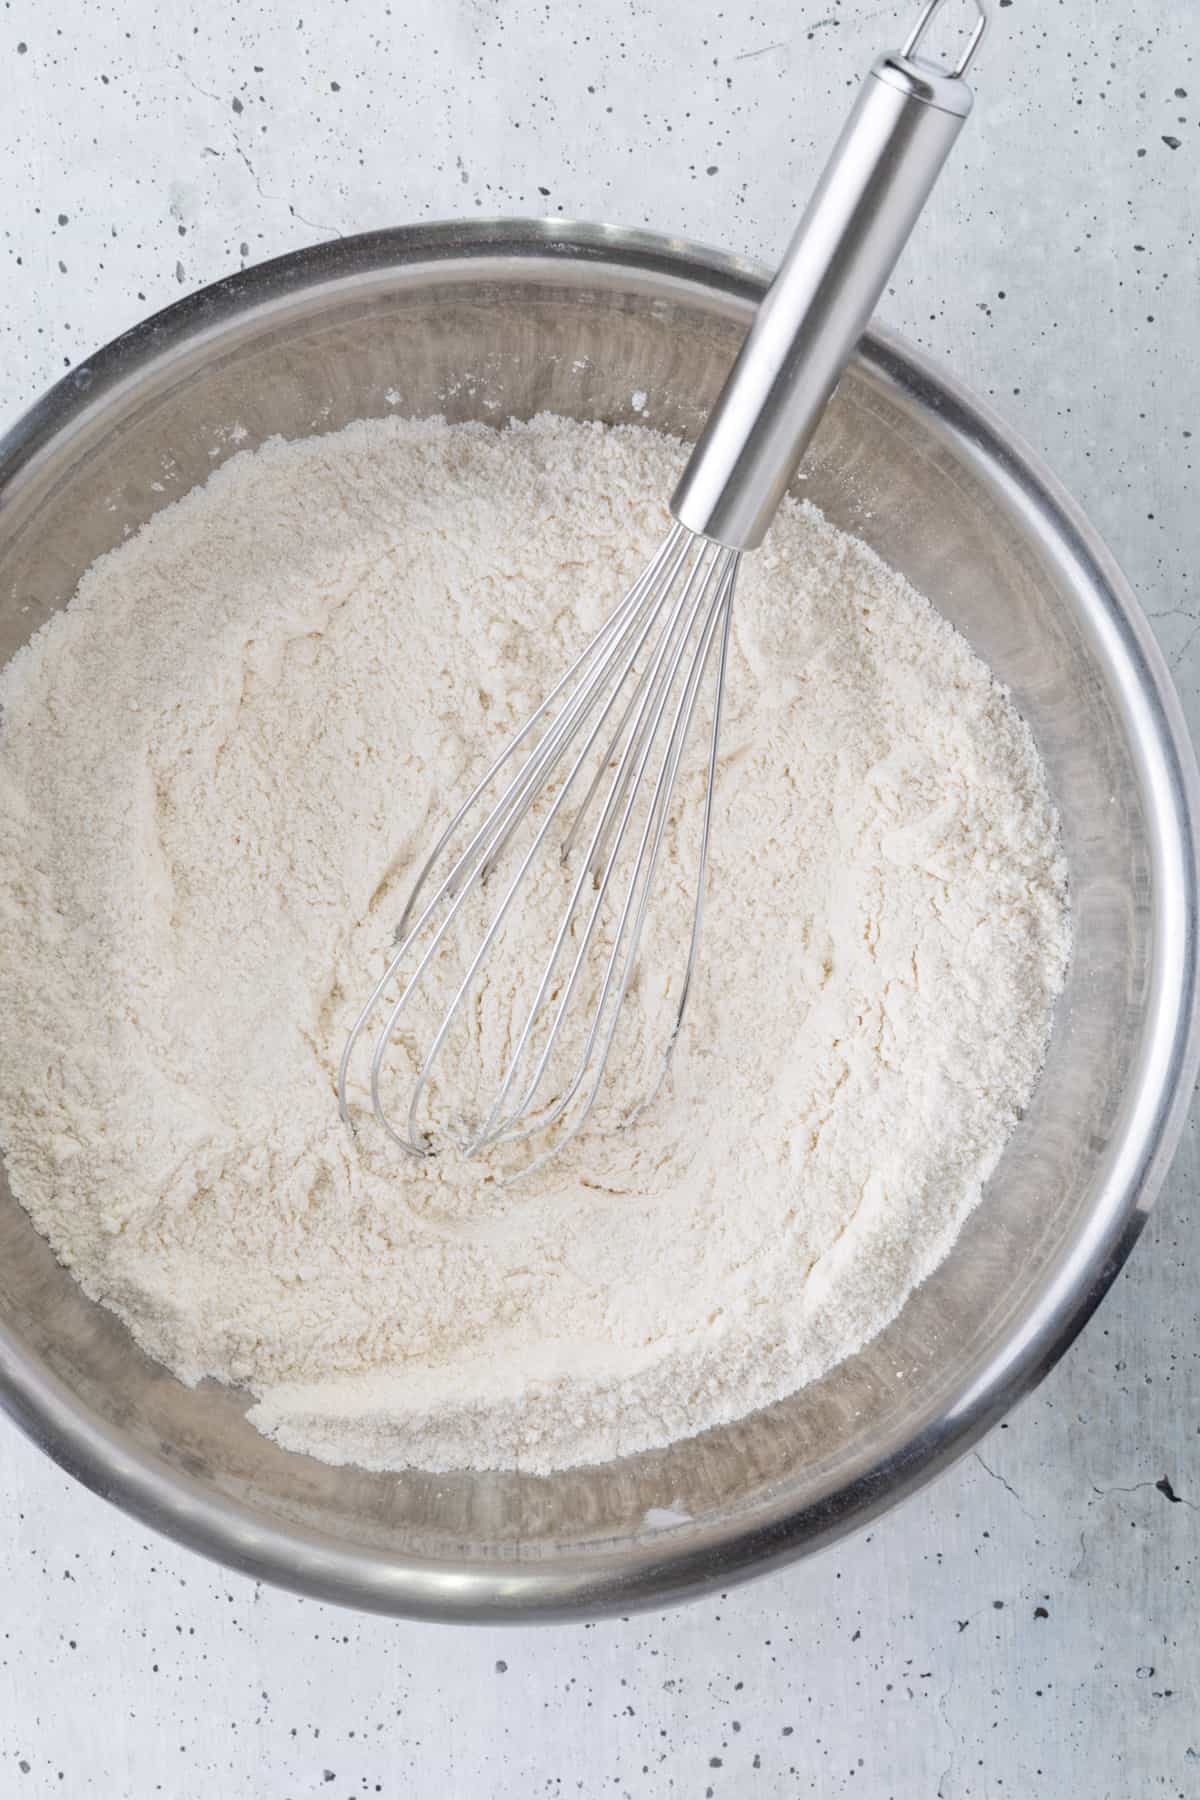 The dry ingredients in a medium bowl with a whisk.